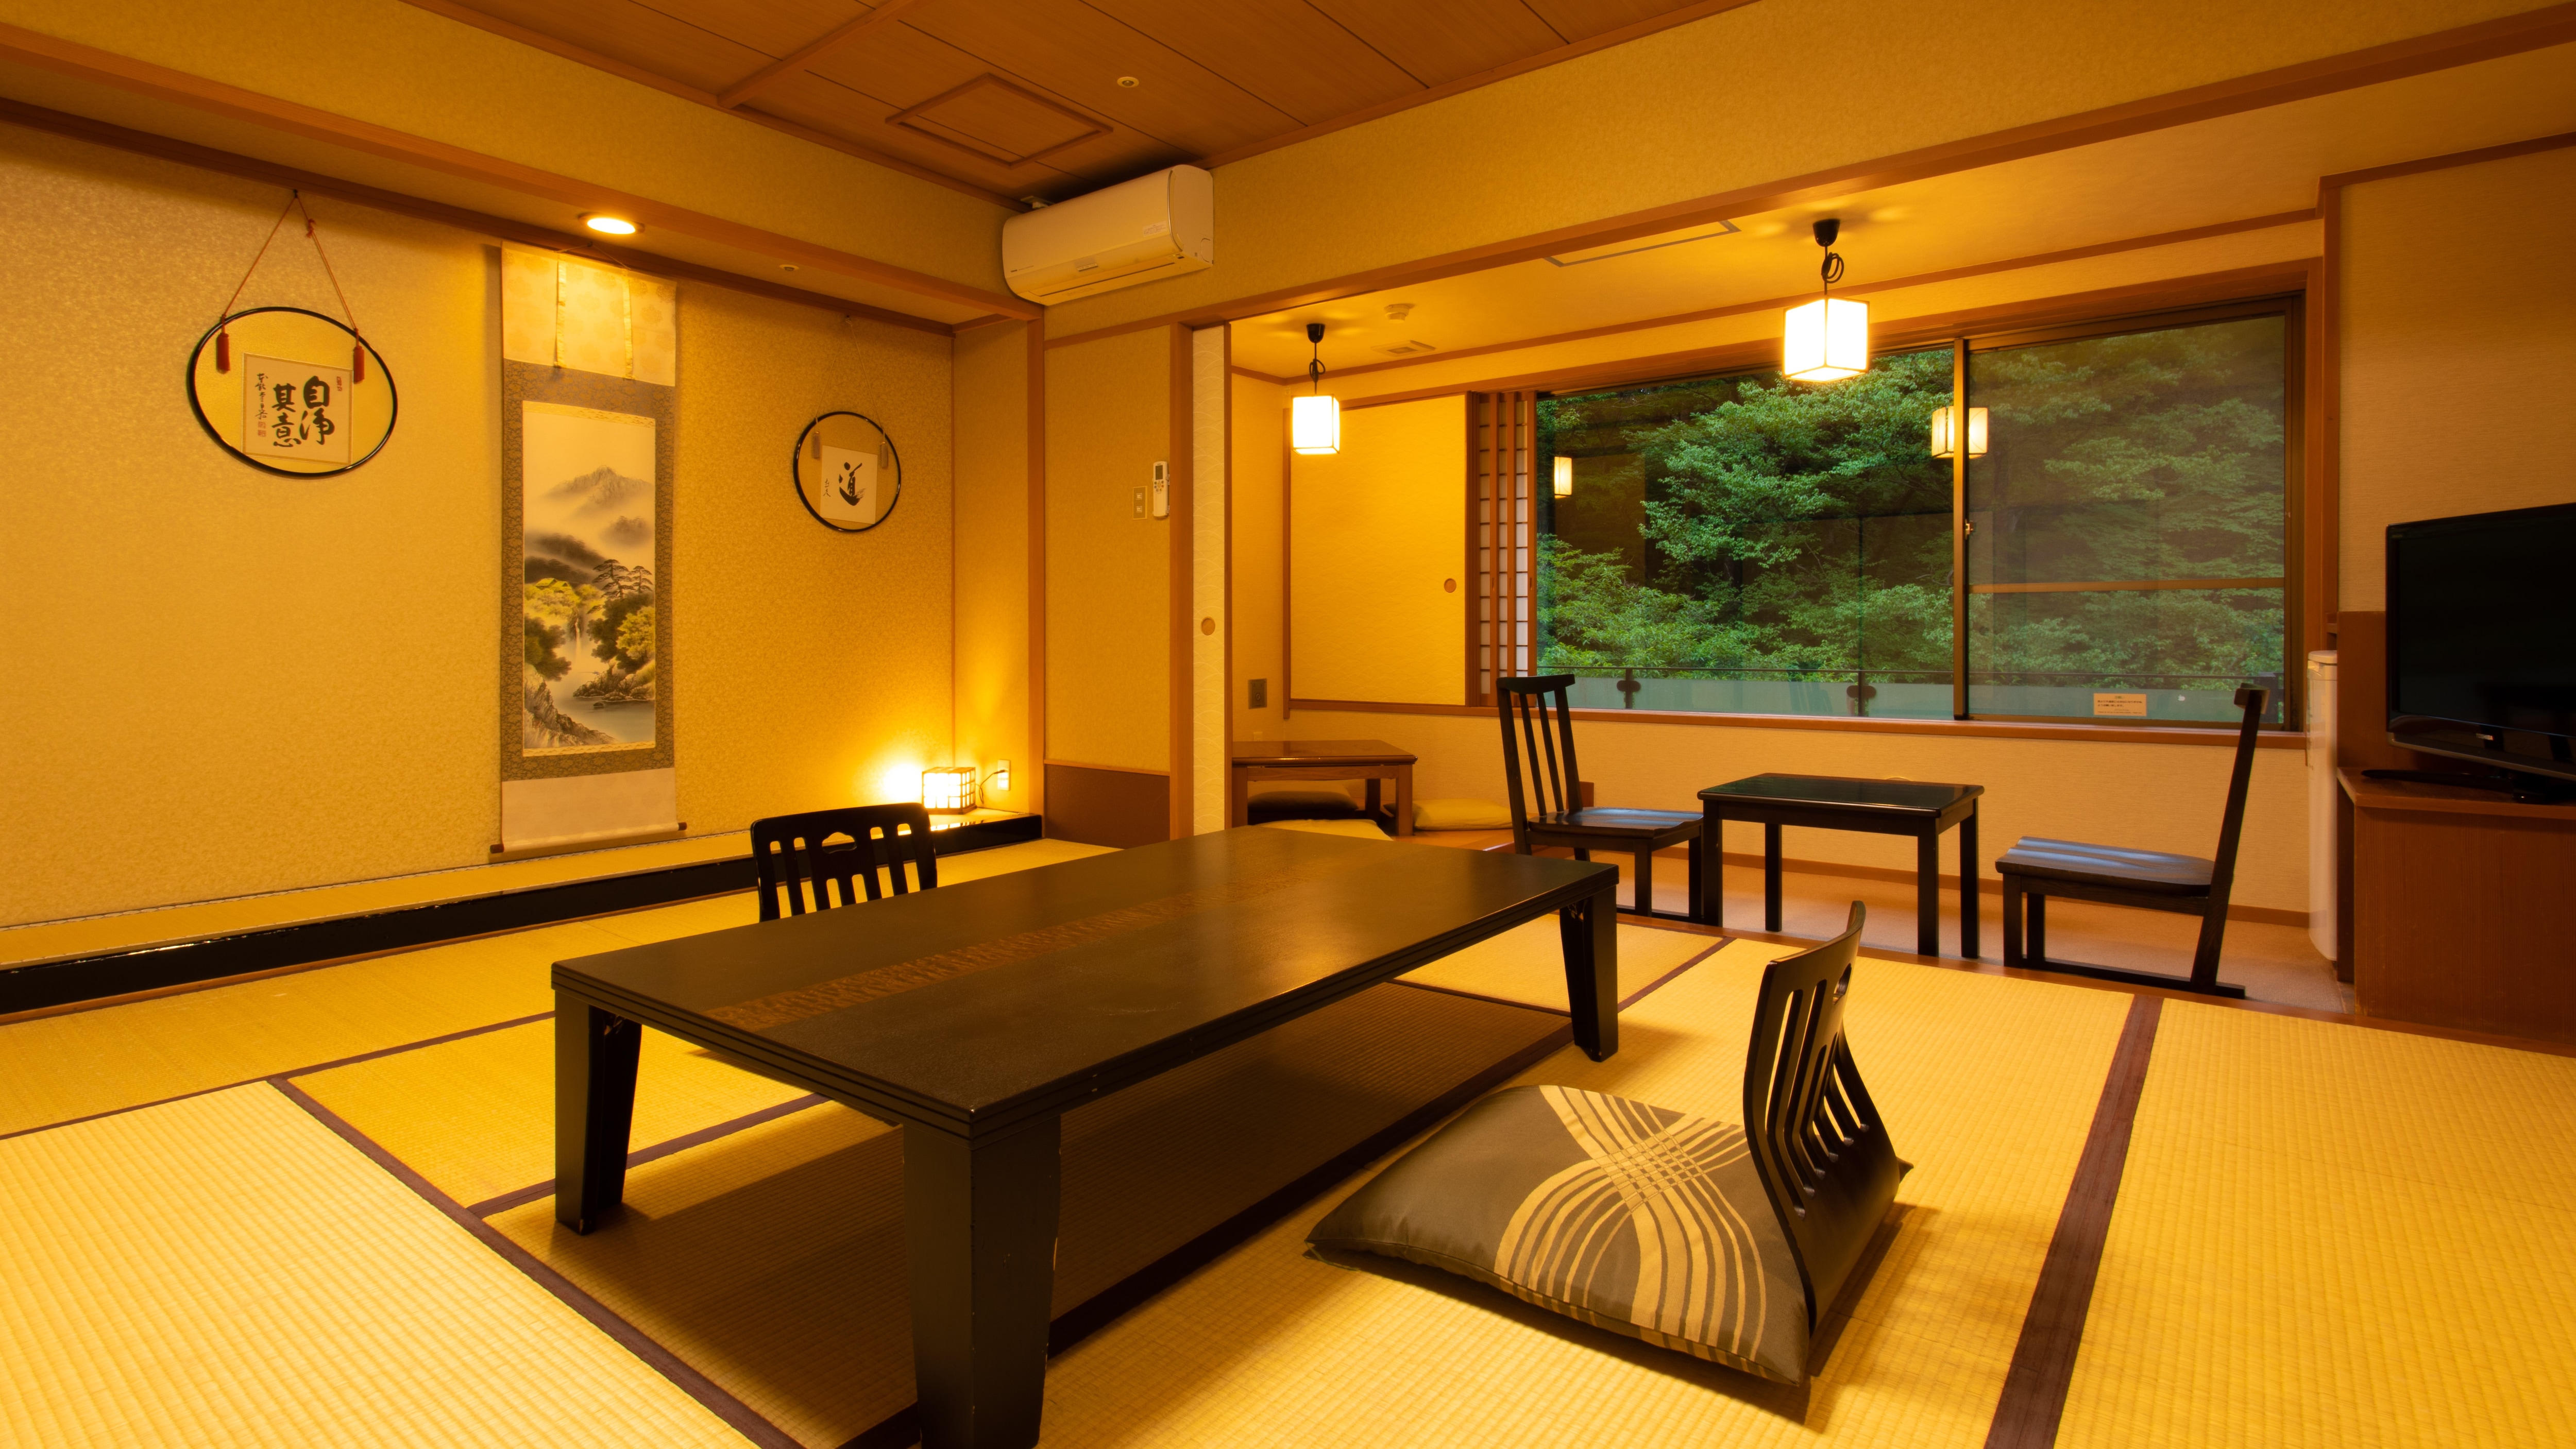 *We will provide you with a Japanese-style room in the main building with a view of the clear Shima River, 10 tatami mats or more.